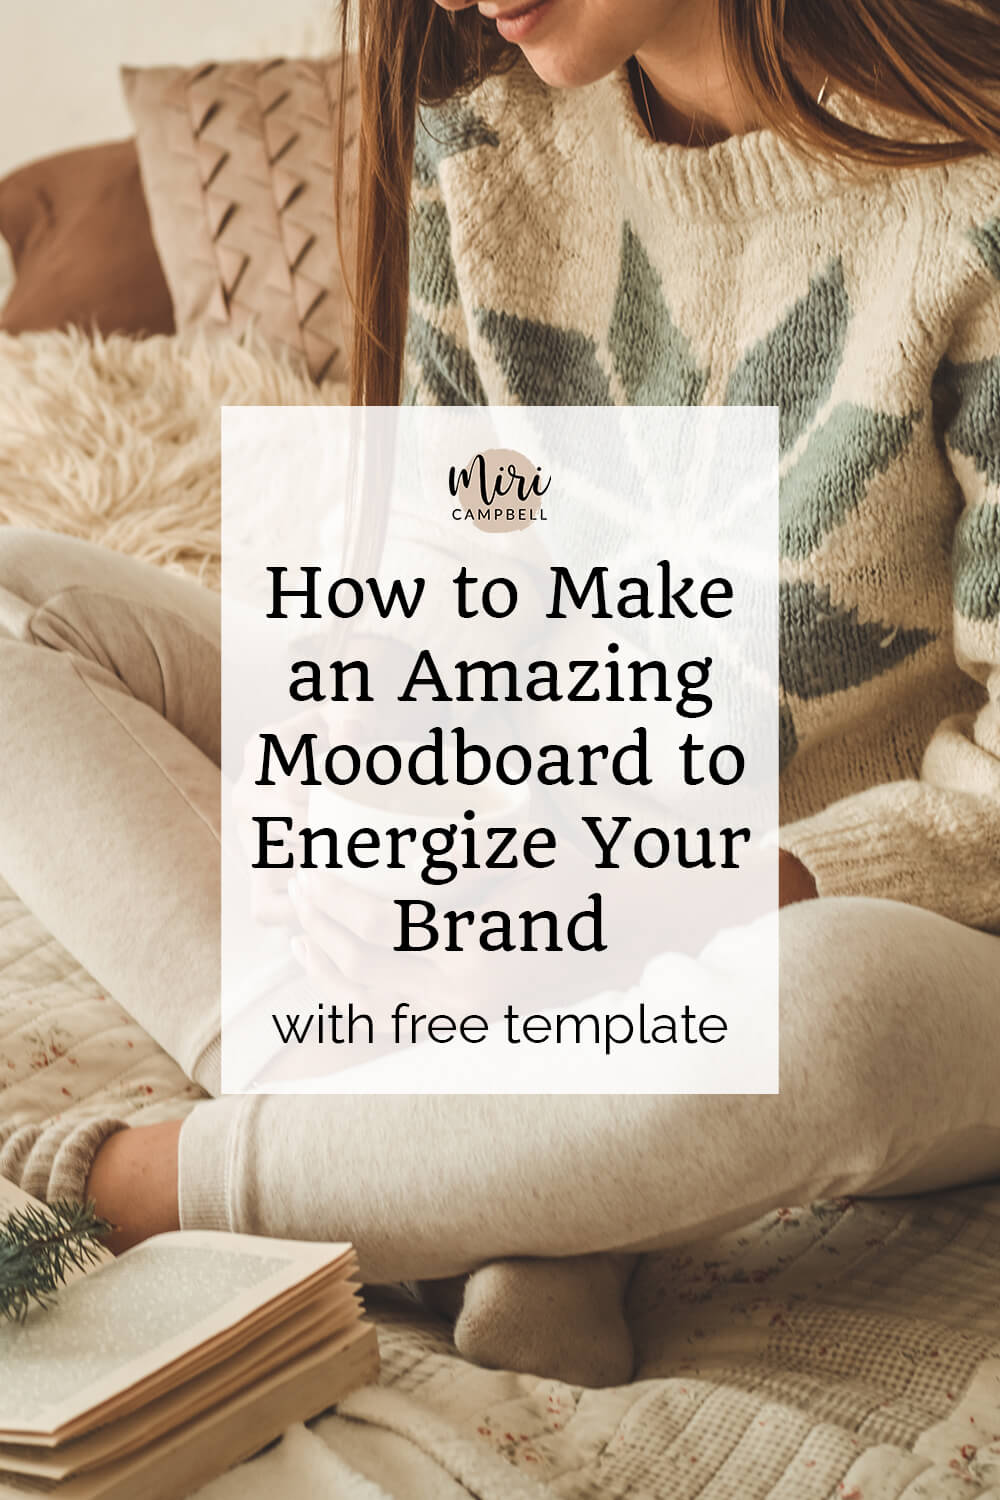 HOw to make an amazing moodboard to energize your coaching business brand